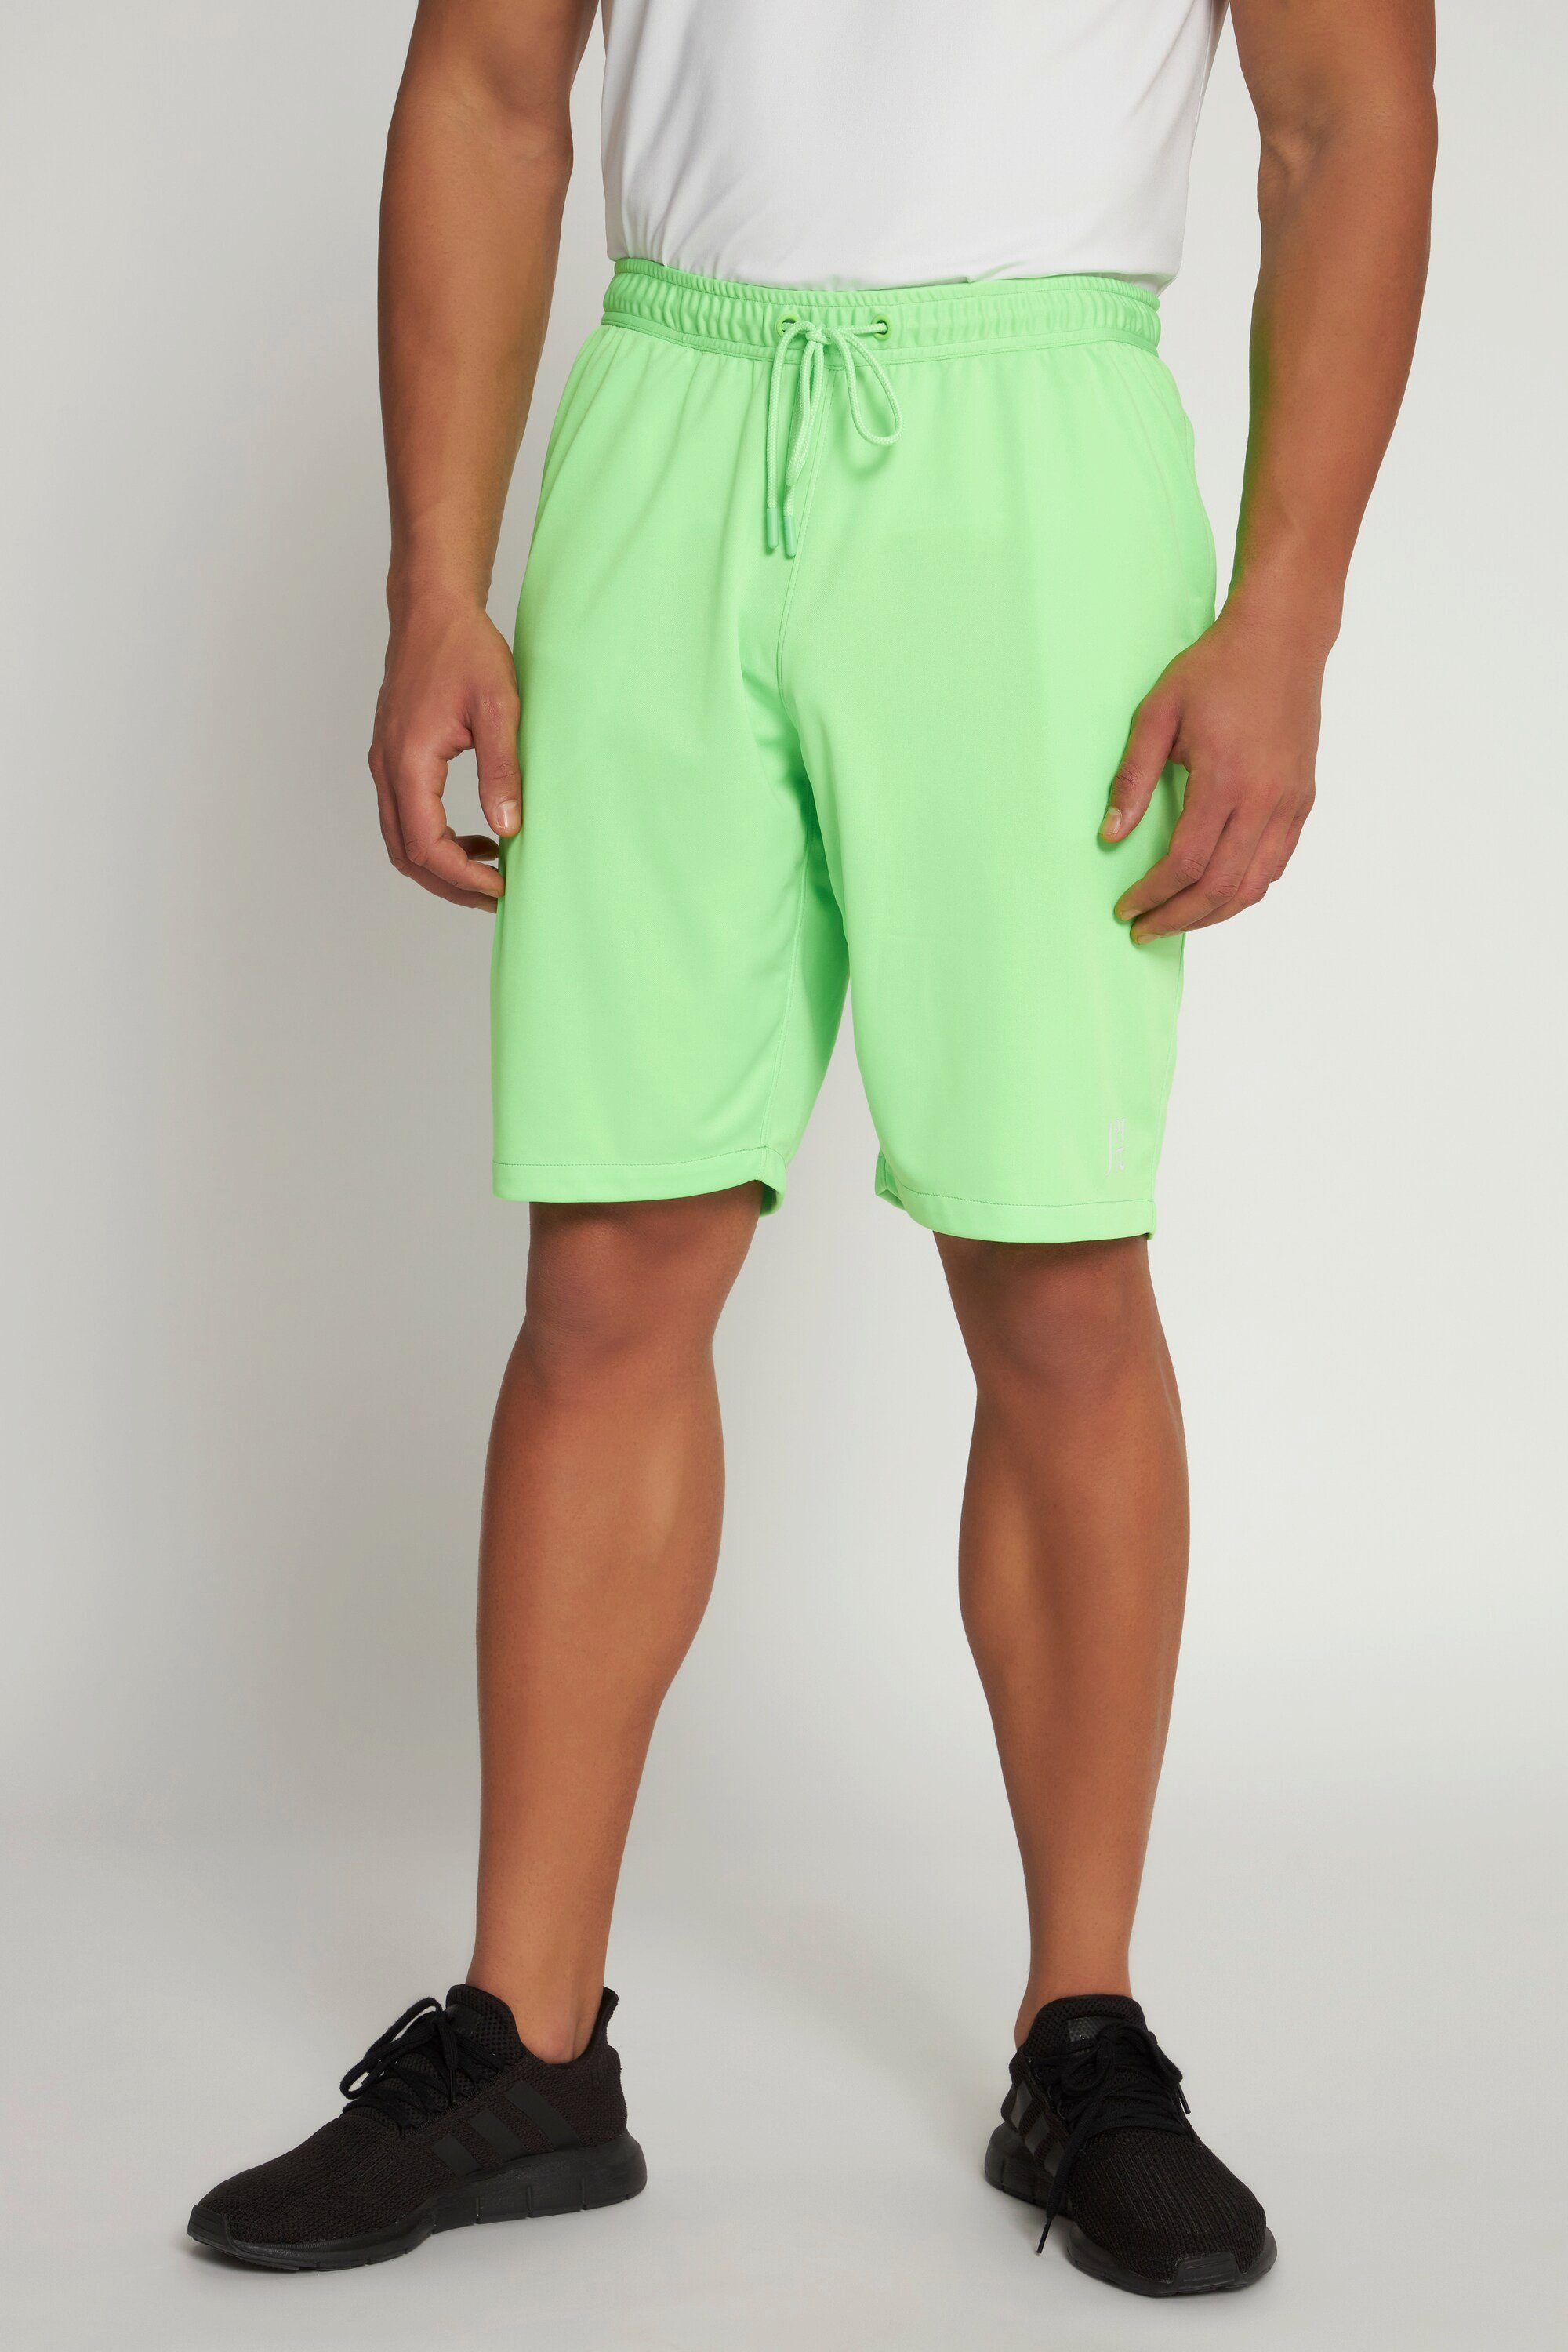 QuickDry JP1880 Fitness Funktions-Shorts Bermudas